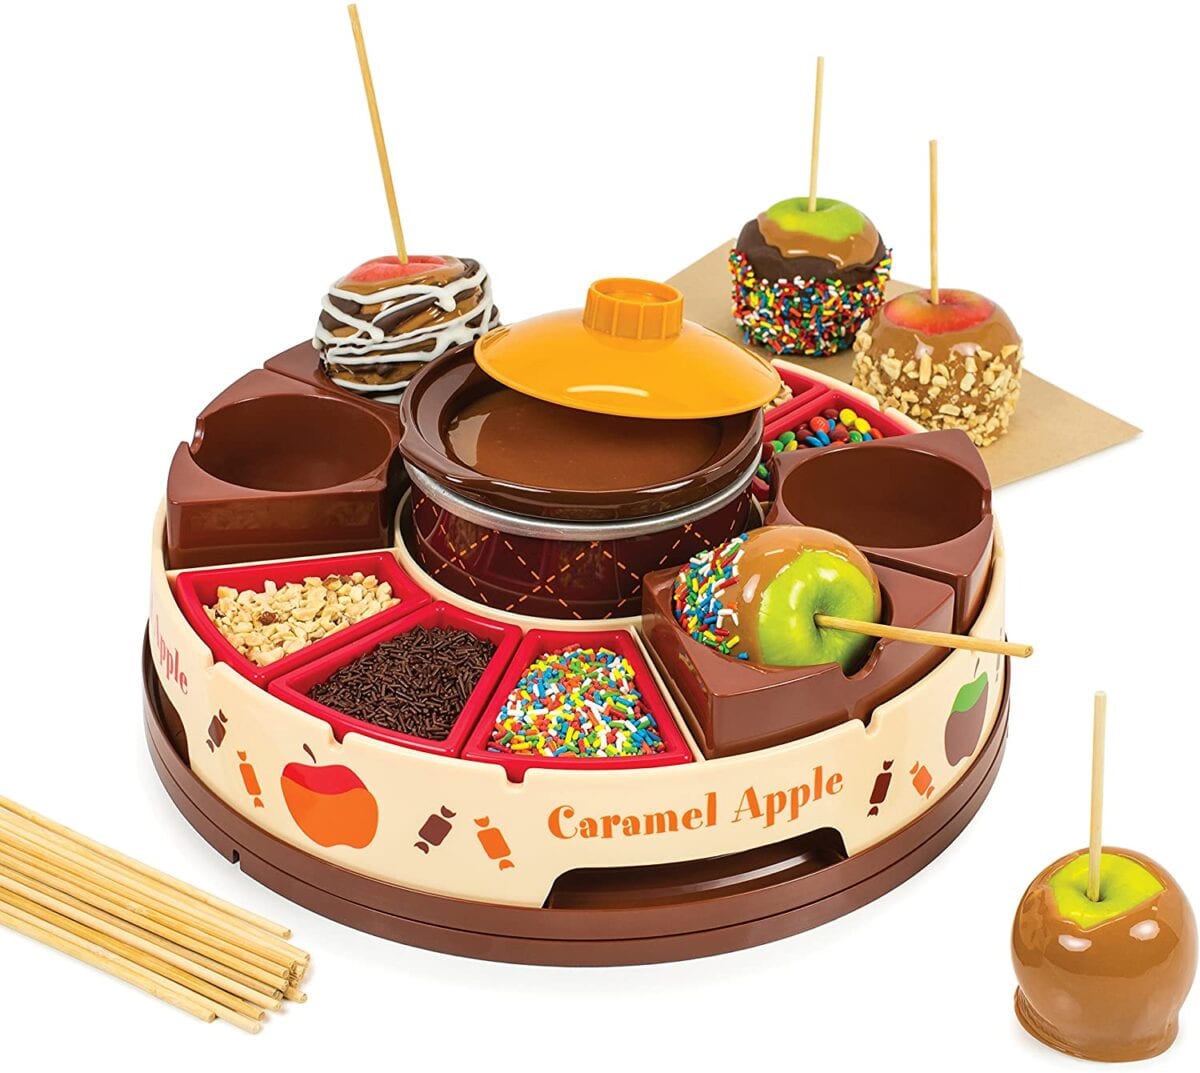 You Can Get A Caramel Apple Lazy Susan That Keeps Your Caramel Warm and I Need It